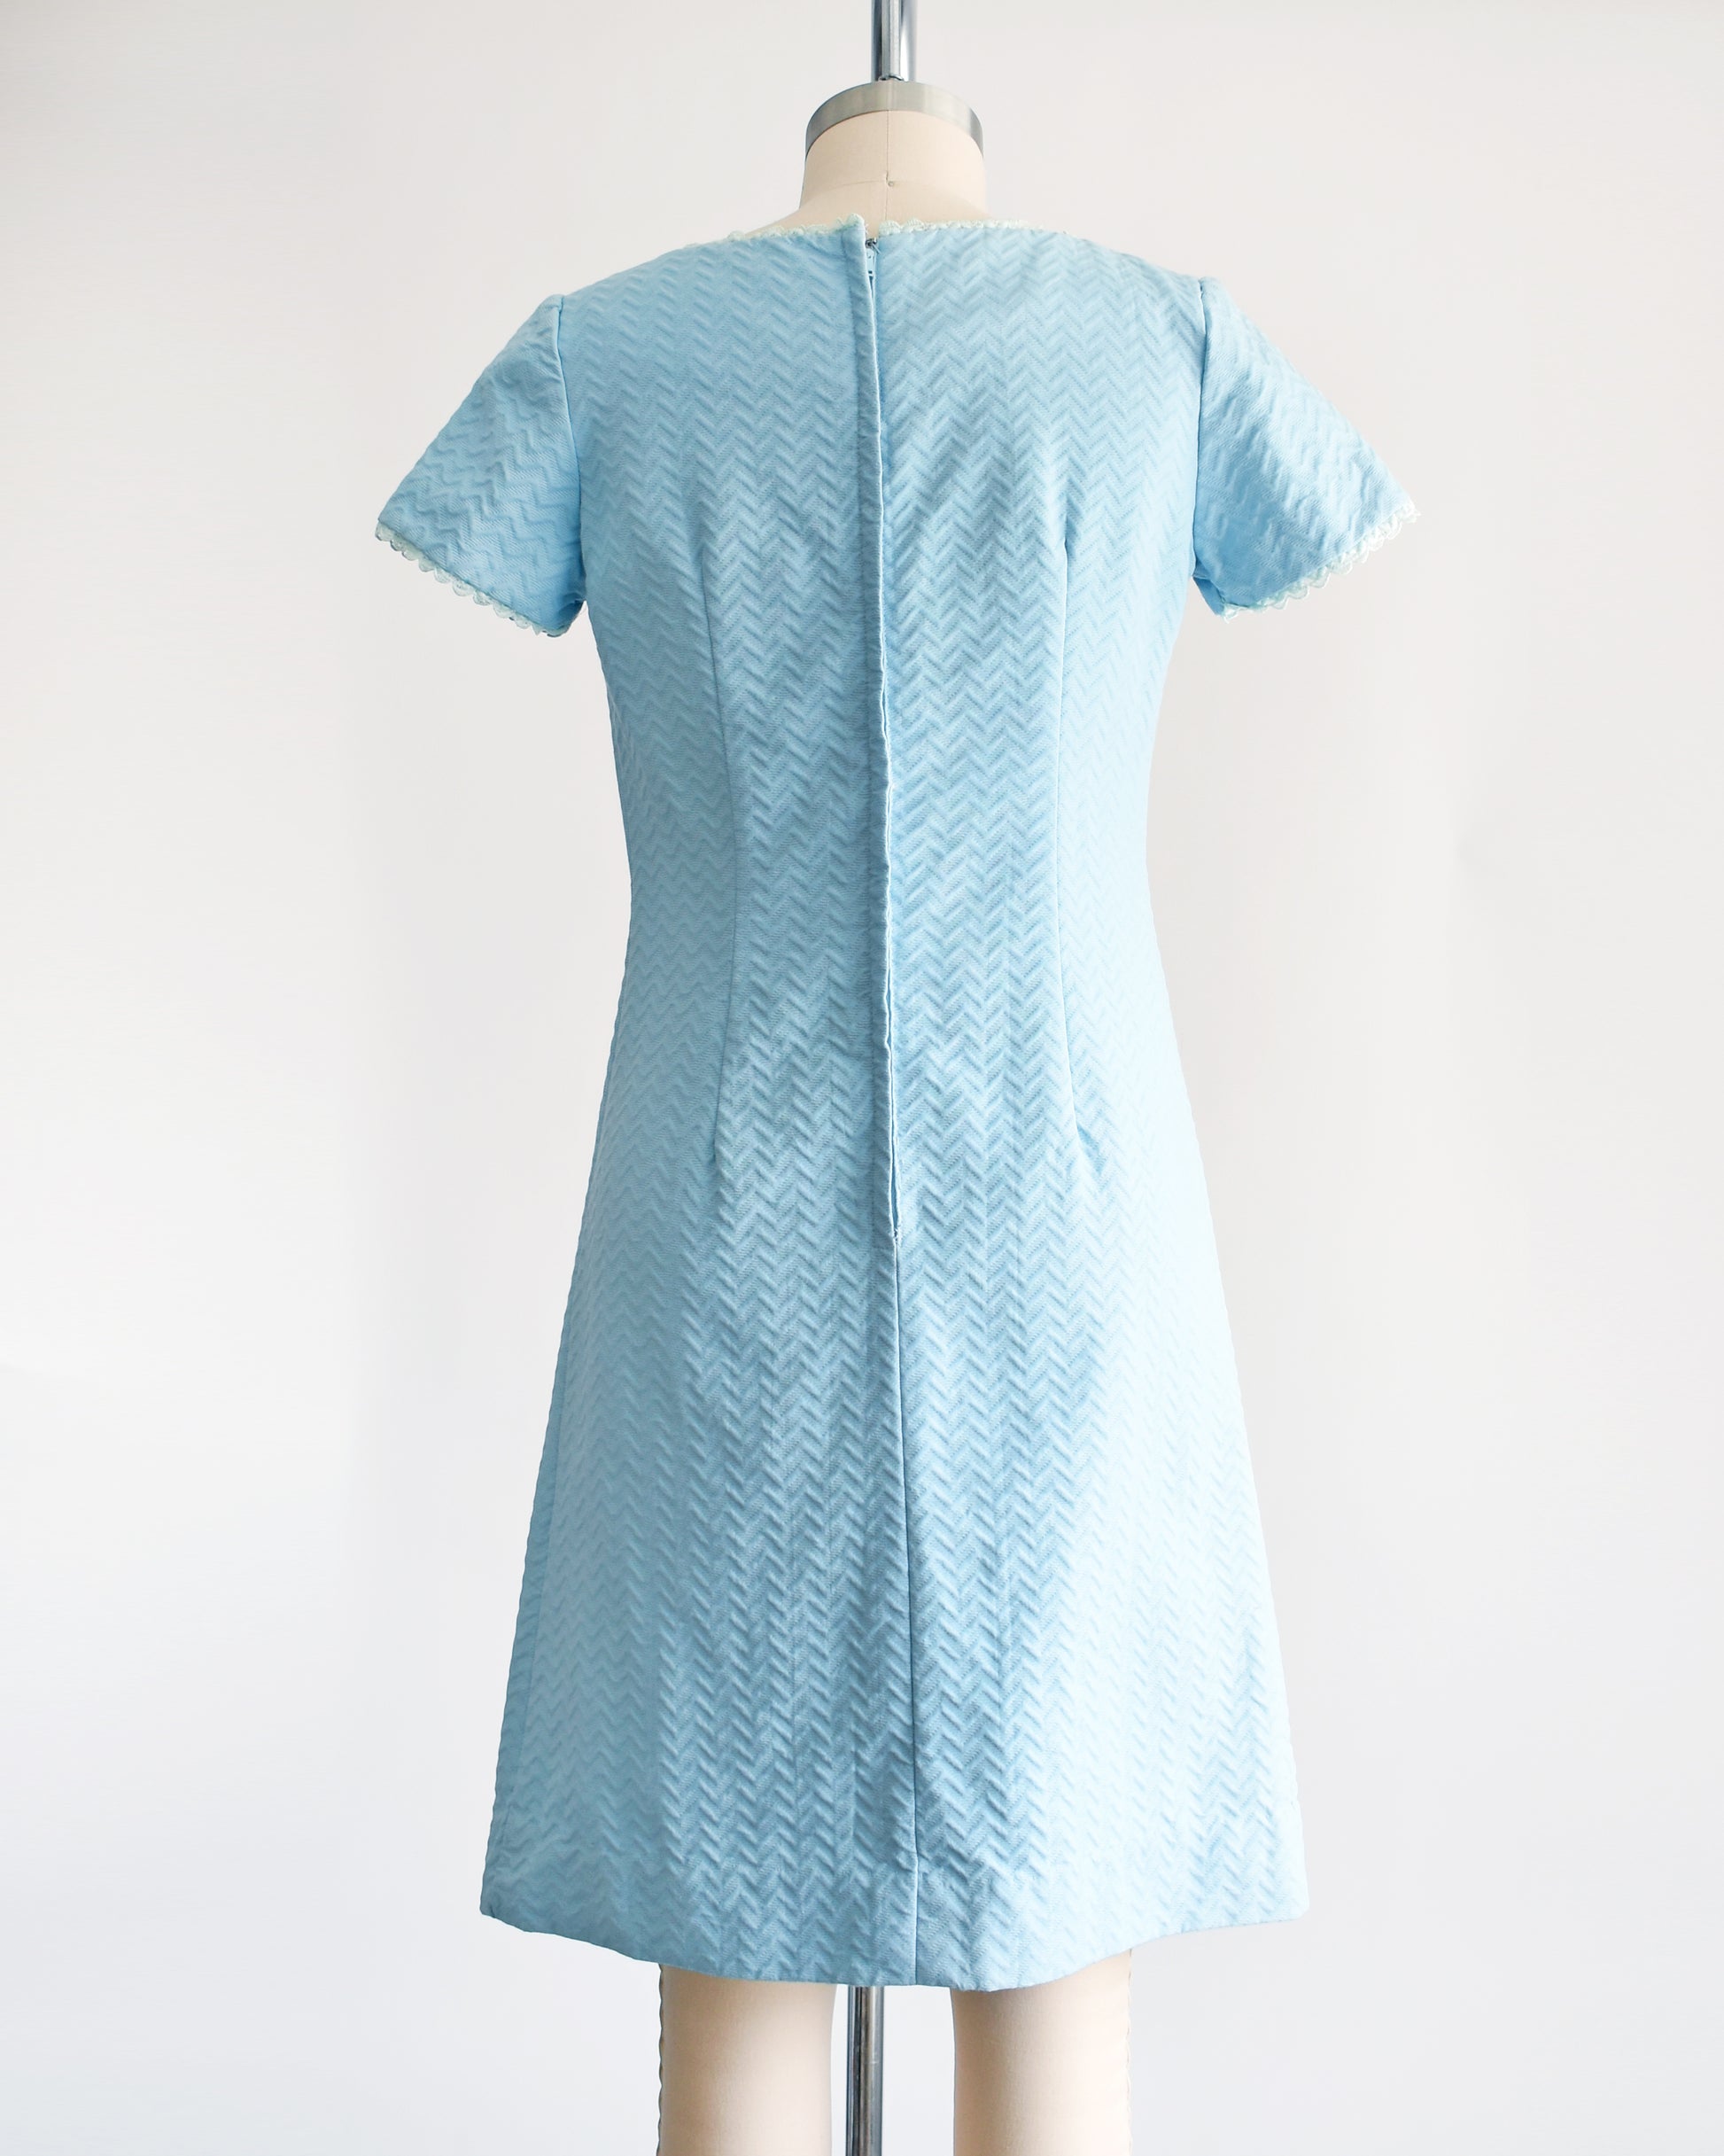 Back view of a A vintage 1960s mod dress that has textured light blue chevron striped knit with alternating ribbing and lace trim.